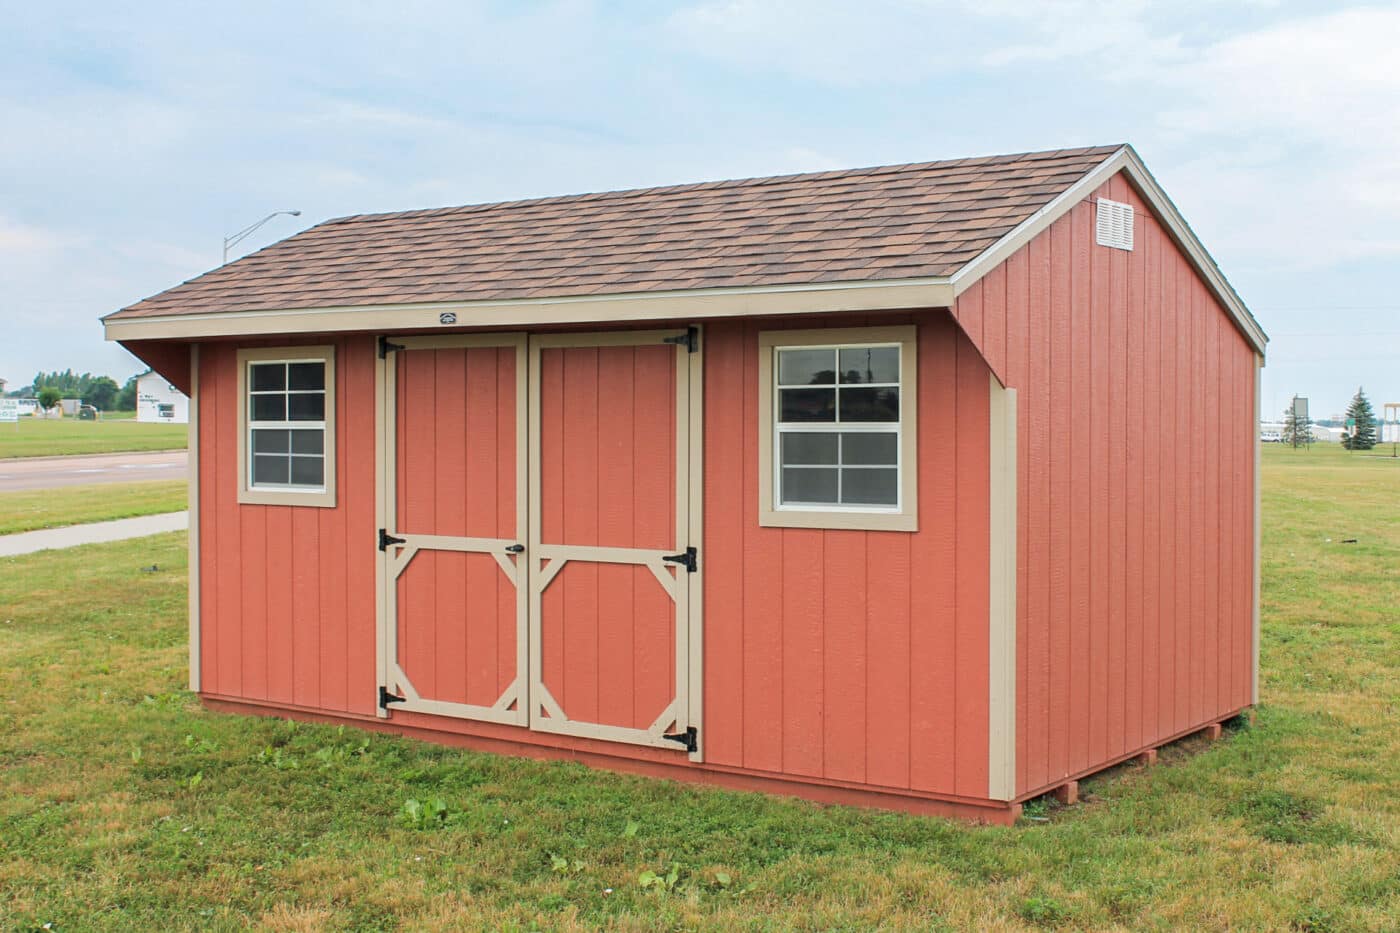 Red Quaker Prefab Shed in field